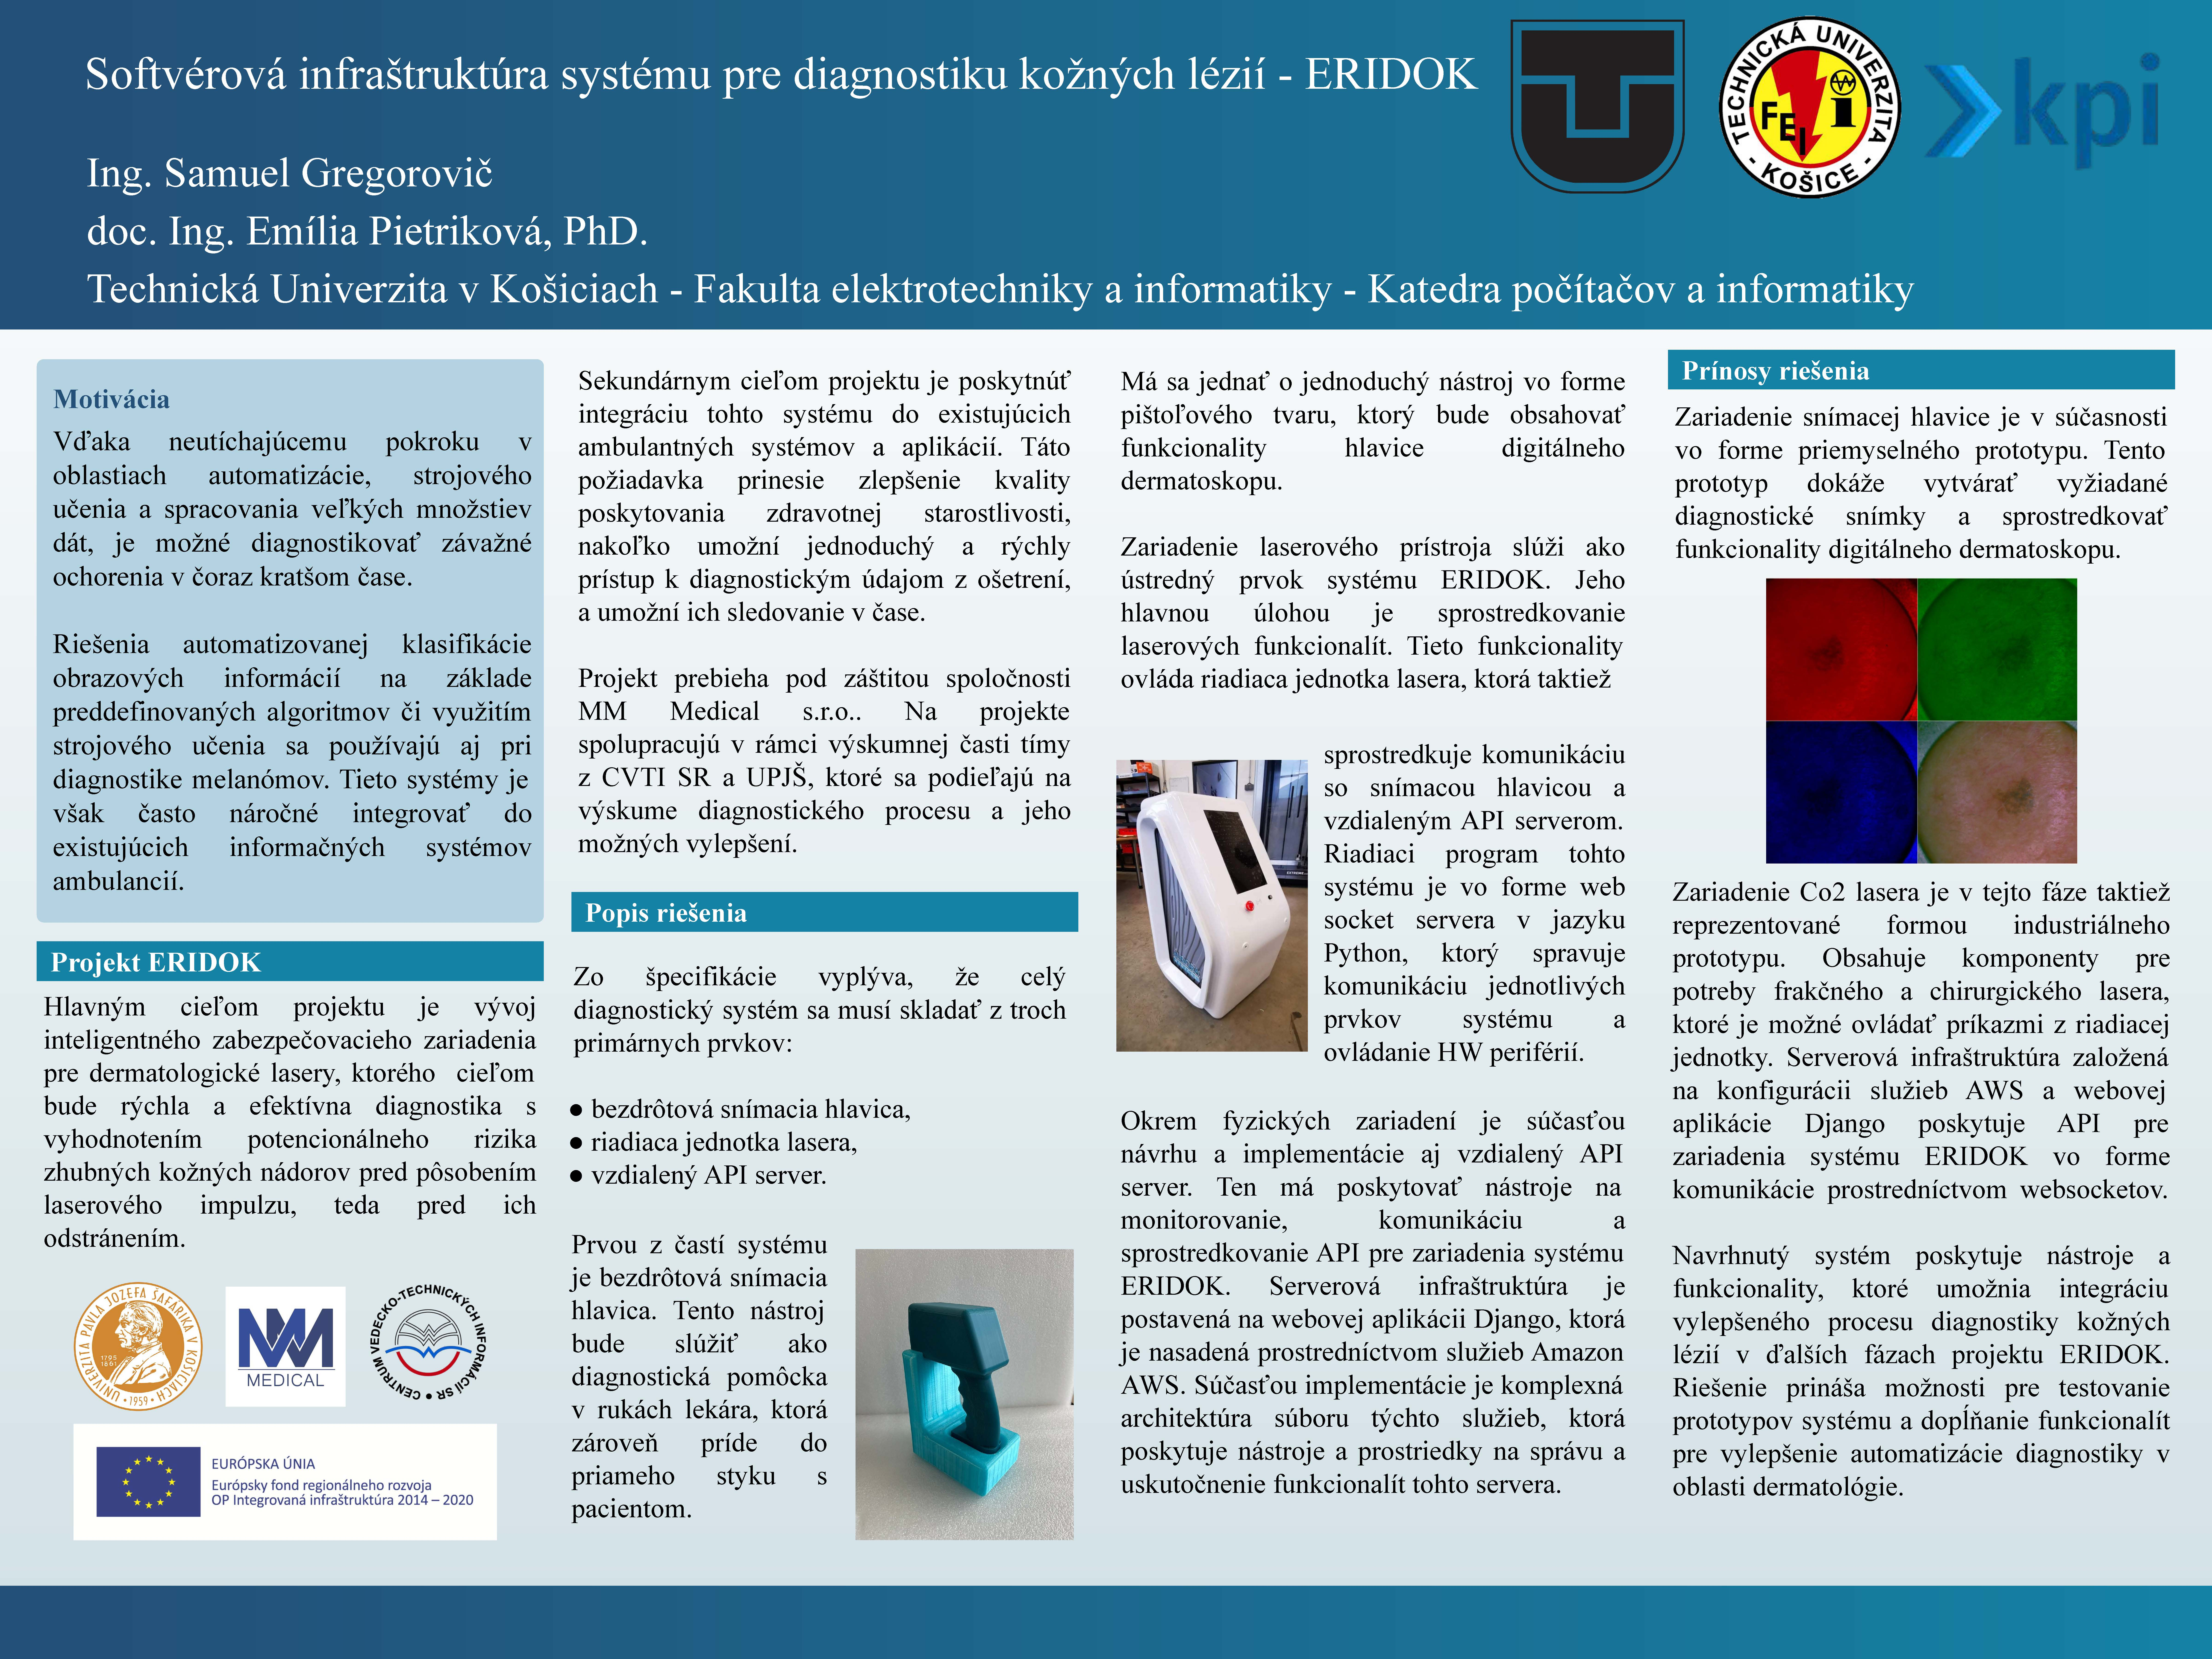 Software infrastructure of the system for the diagnosis of skin lesions – ERIDOK